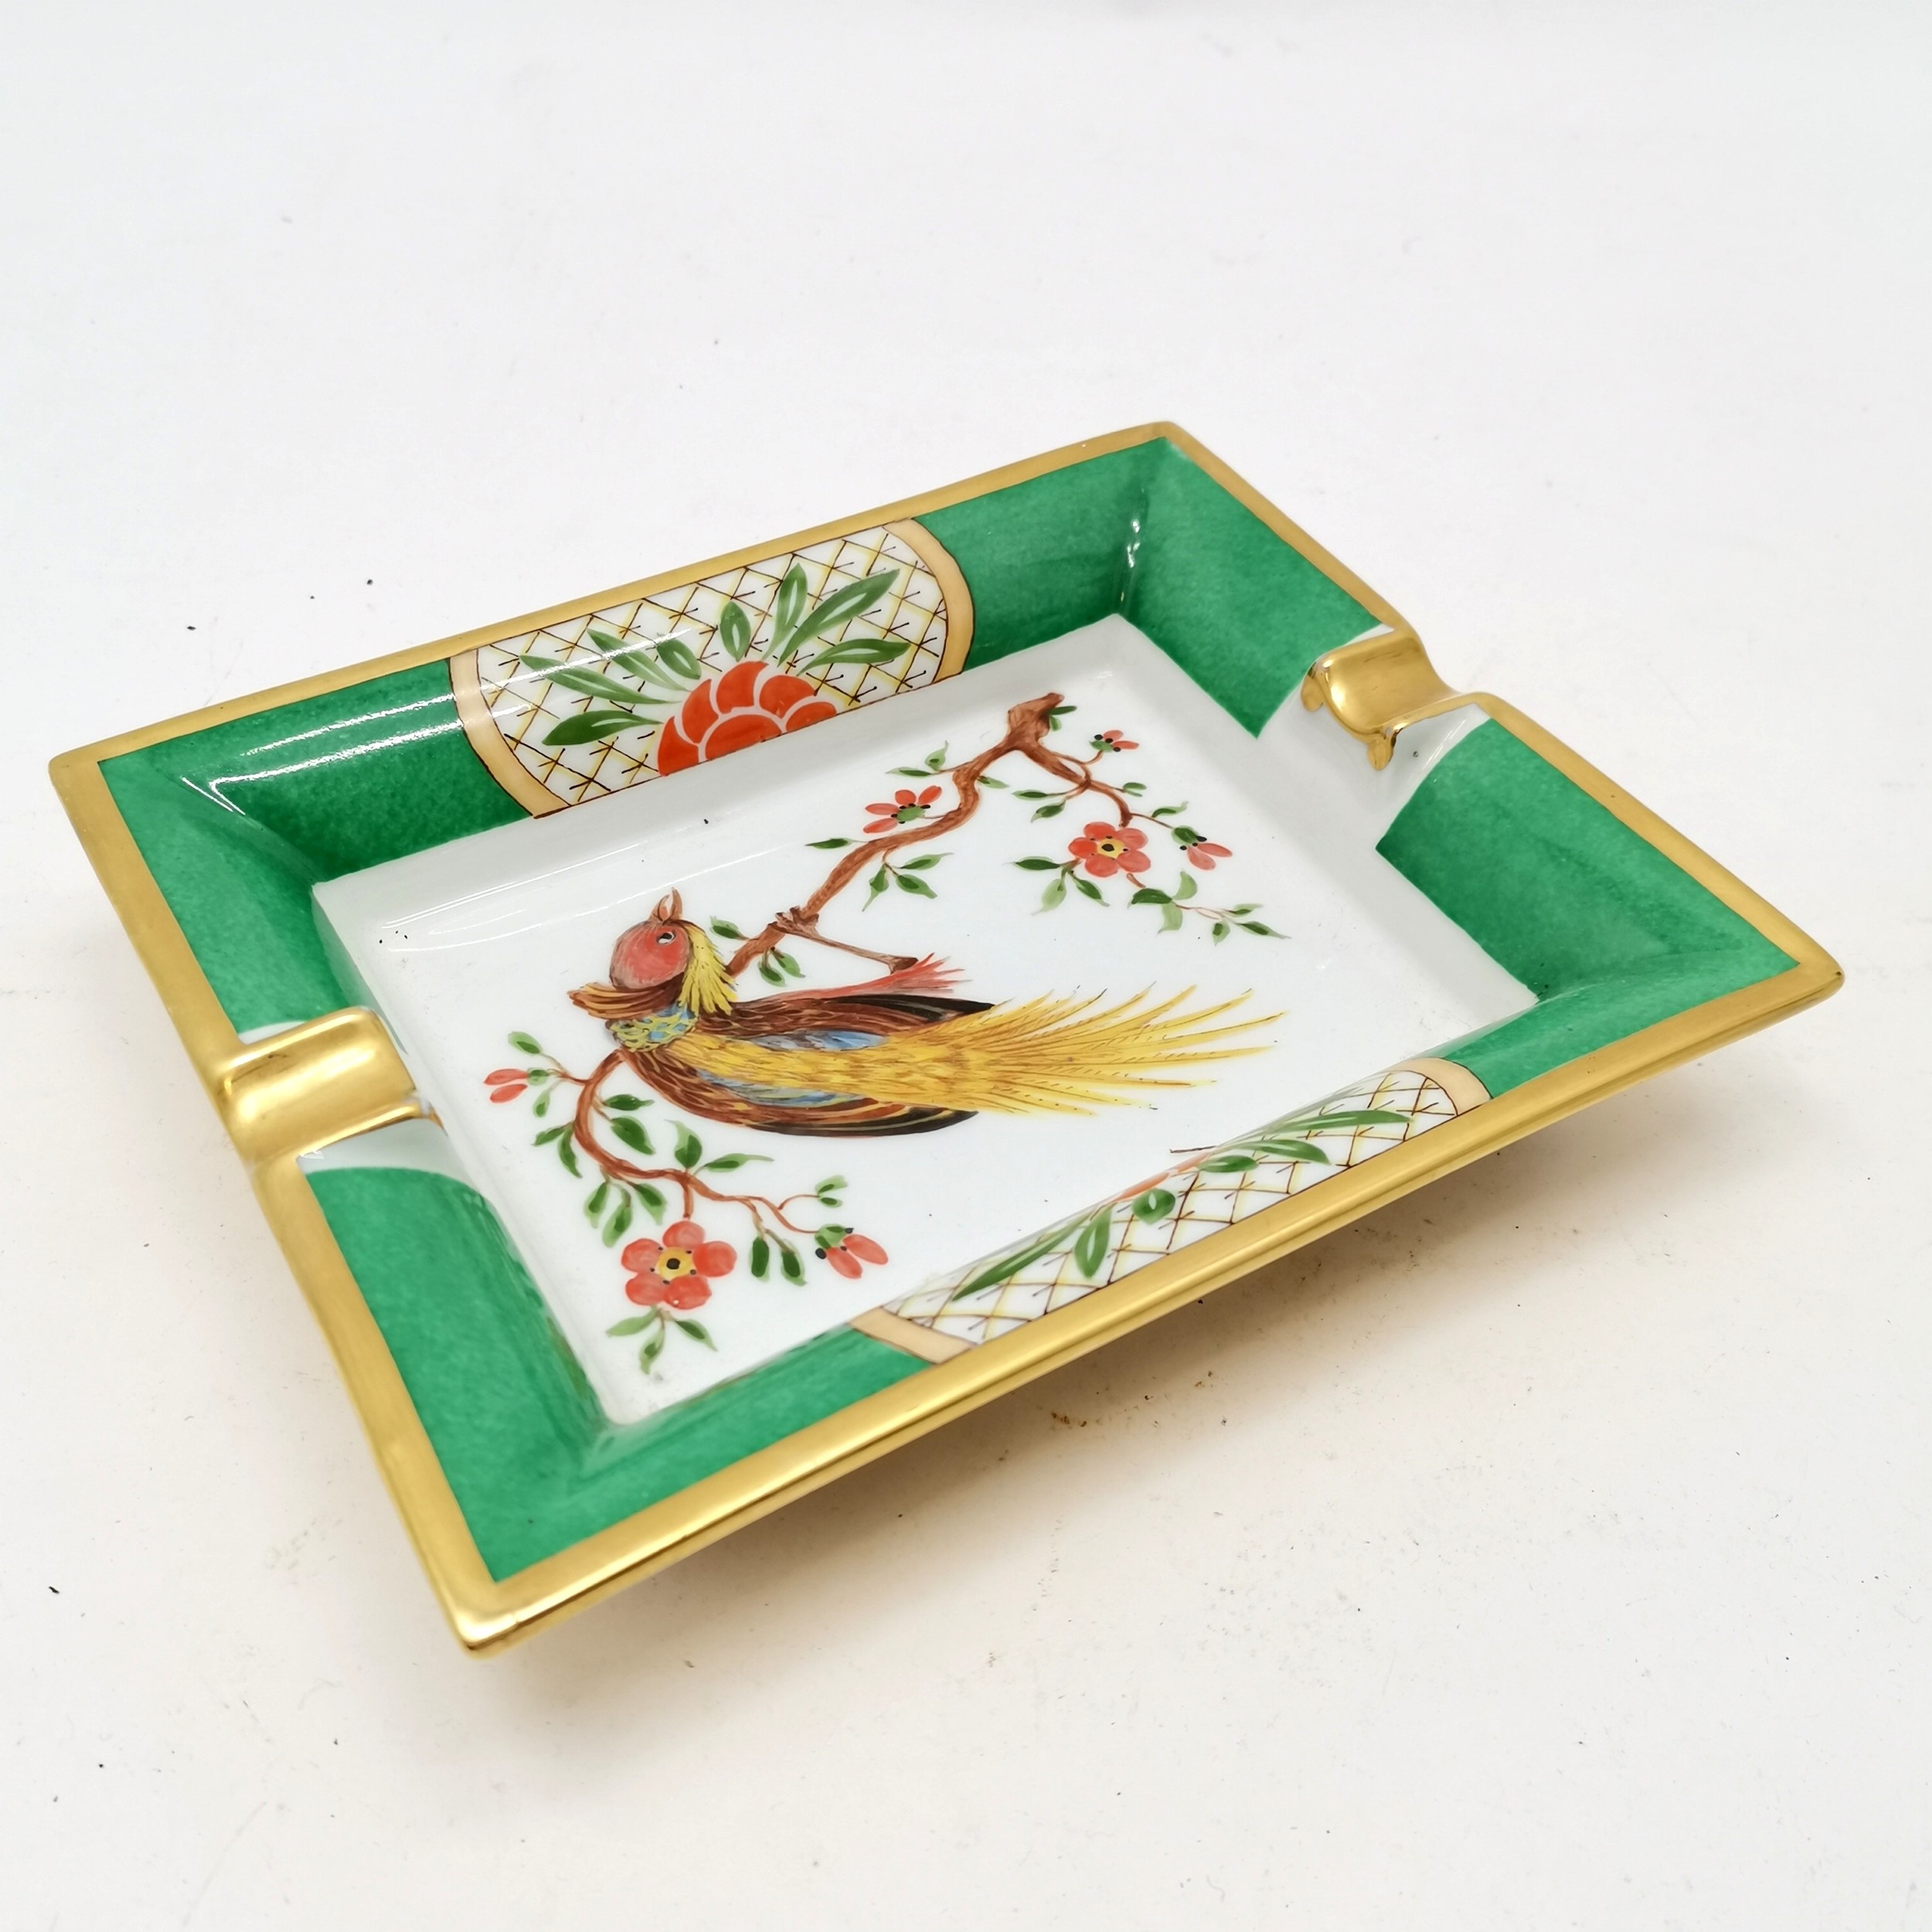 Hermes Paris Made in France Porcelain ash tray, decorated with exotic bird within green and floral - Image 4 of 4